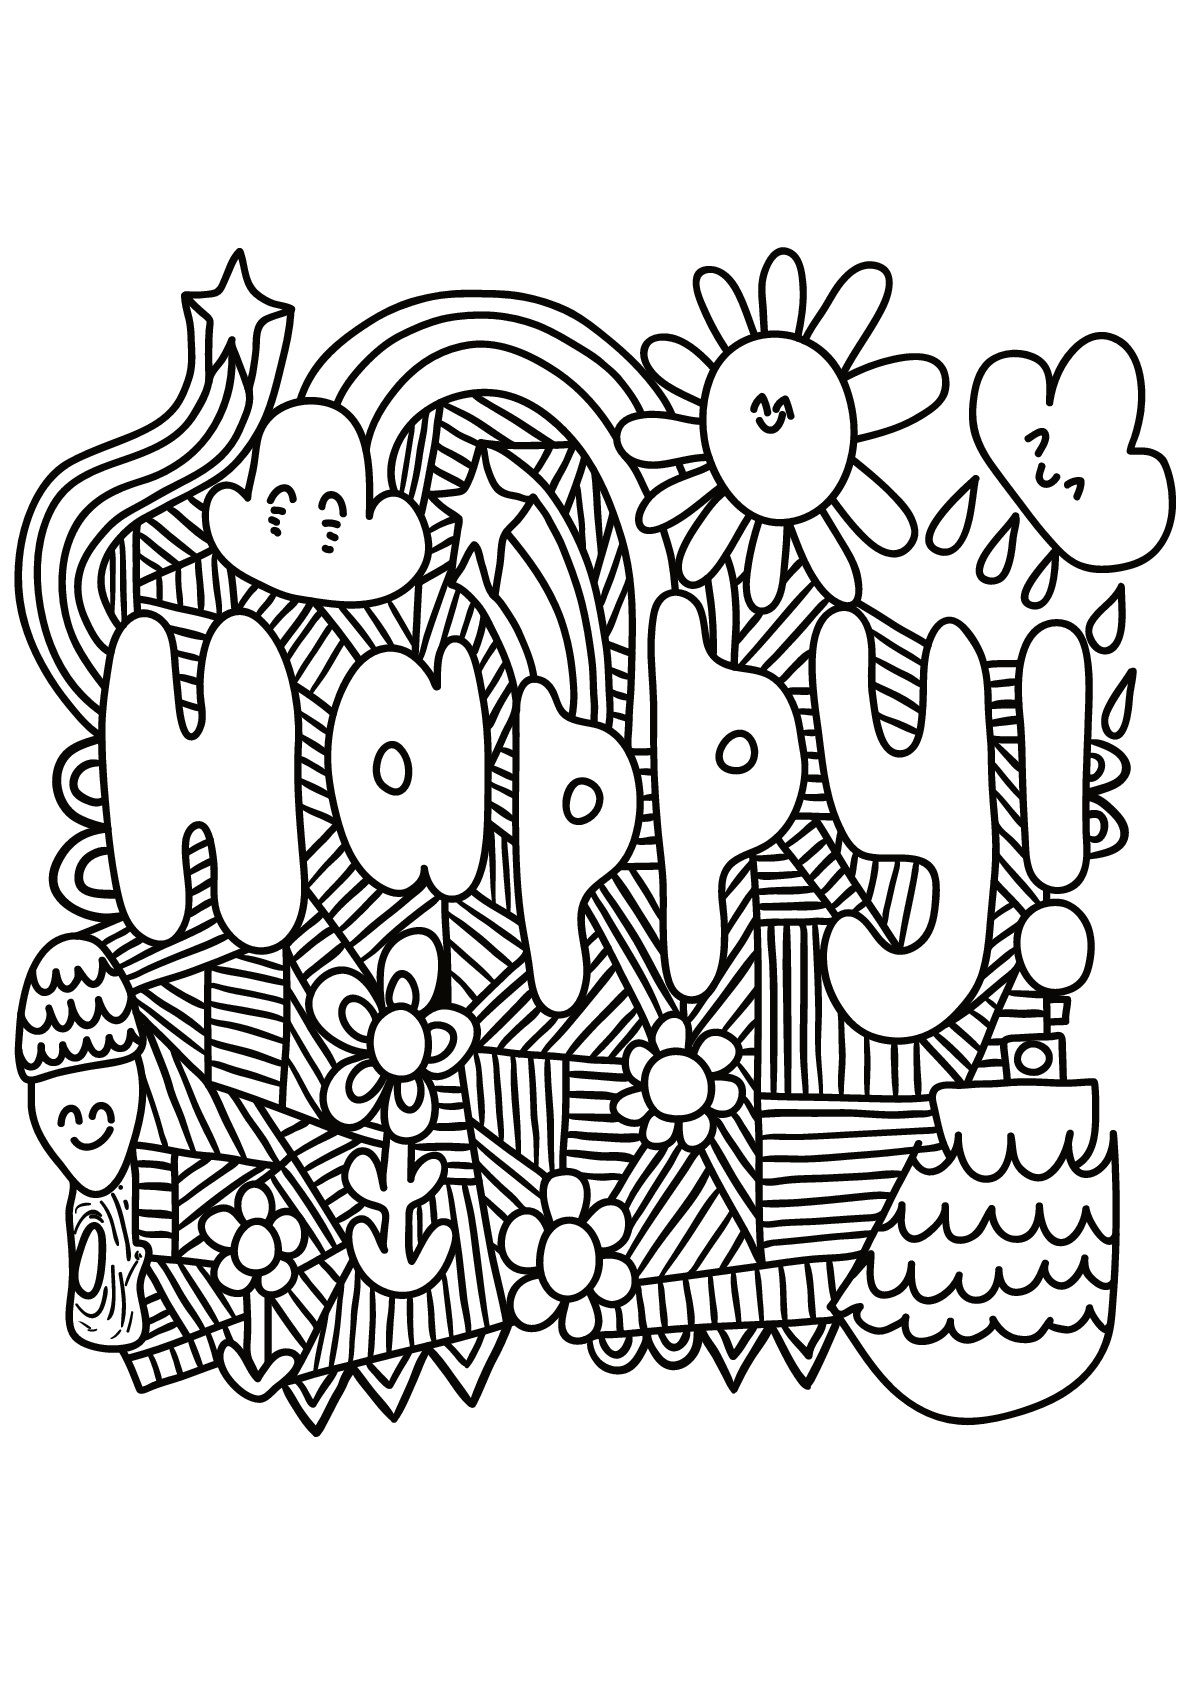 Download Quote Coloring Pages for Adults and Teens - Best Coloring ...